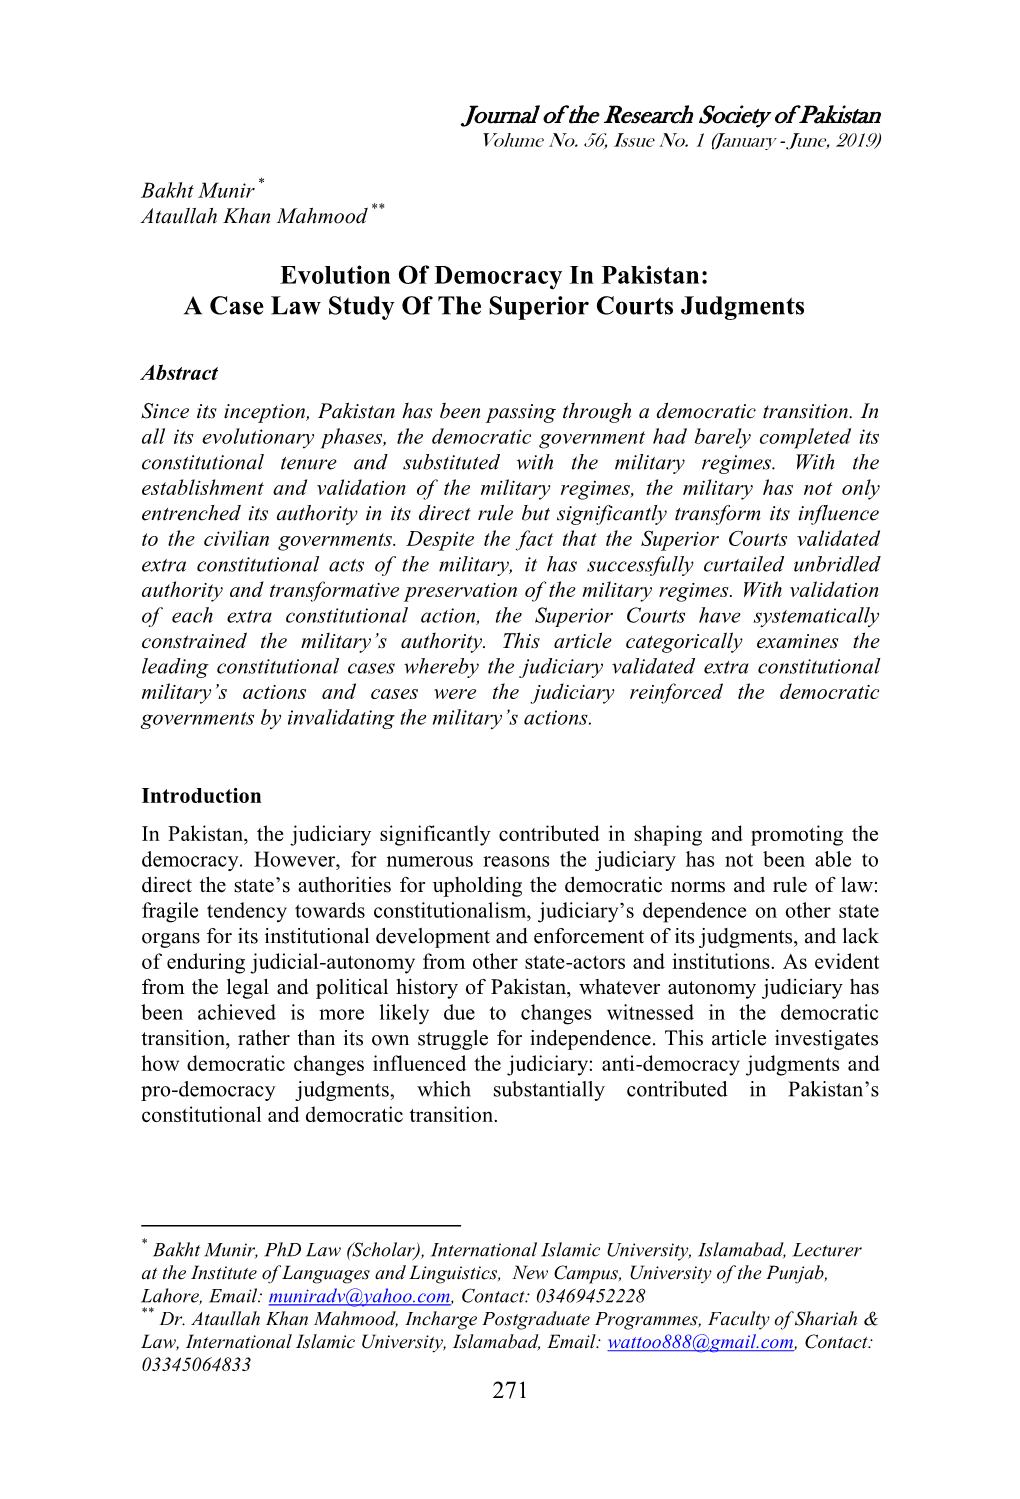 Evolution of Democracy in Pakistan: a Case Law Study of the Superior Courts Judgments